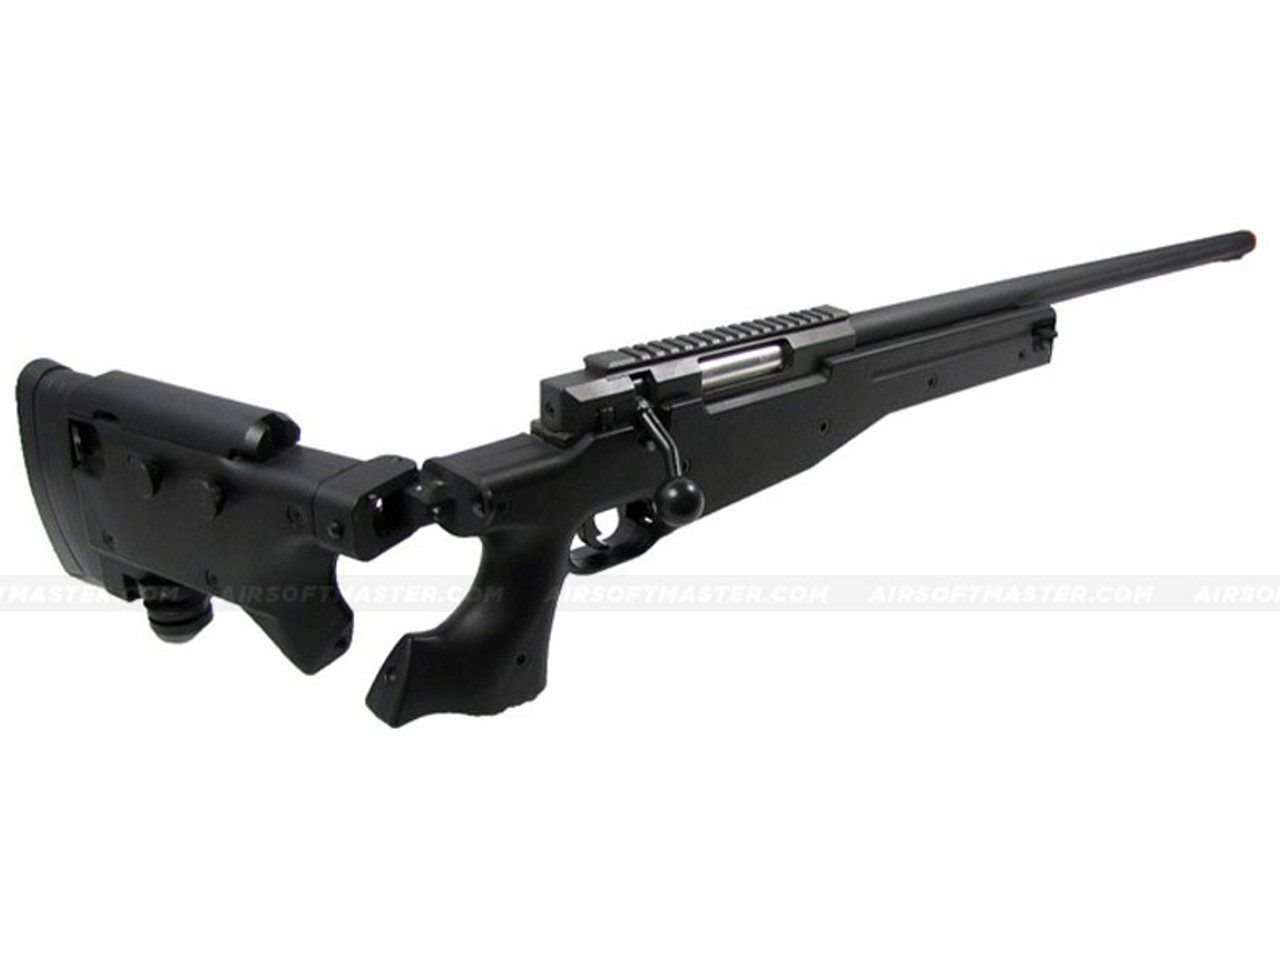 WELL L96 Bolt Action Airsoft Sniper Rifle w/ Folding Stock Black